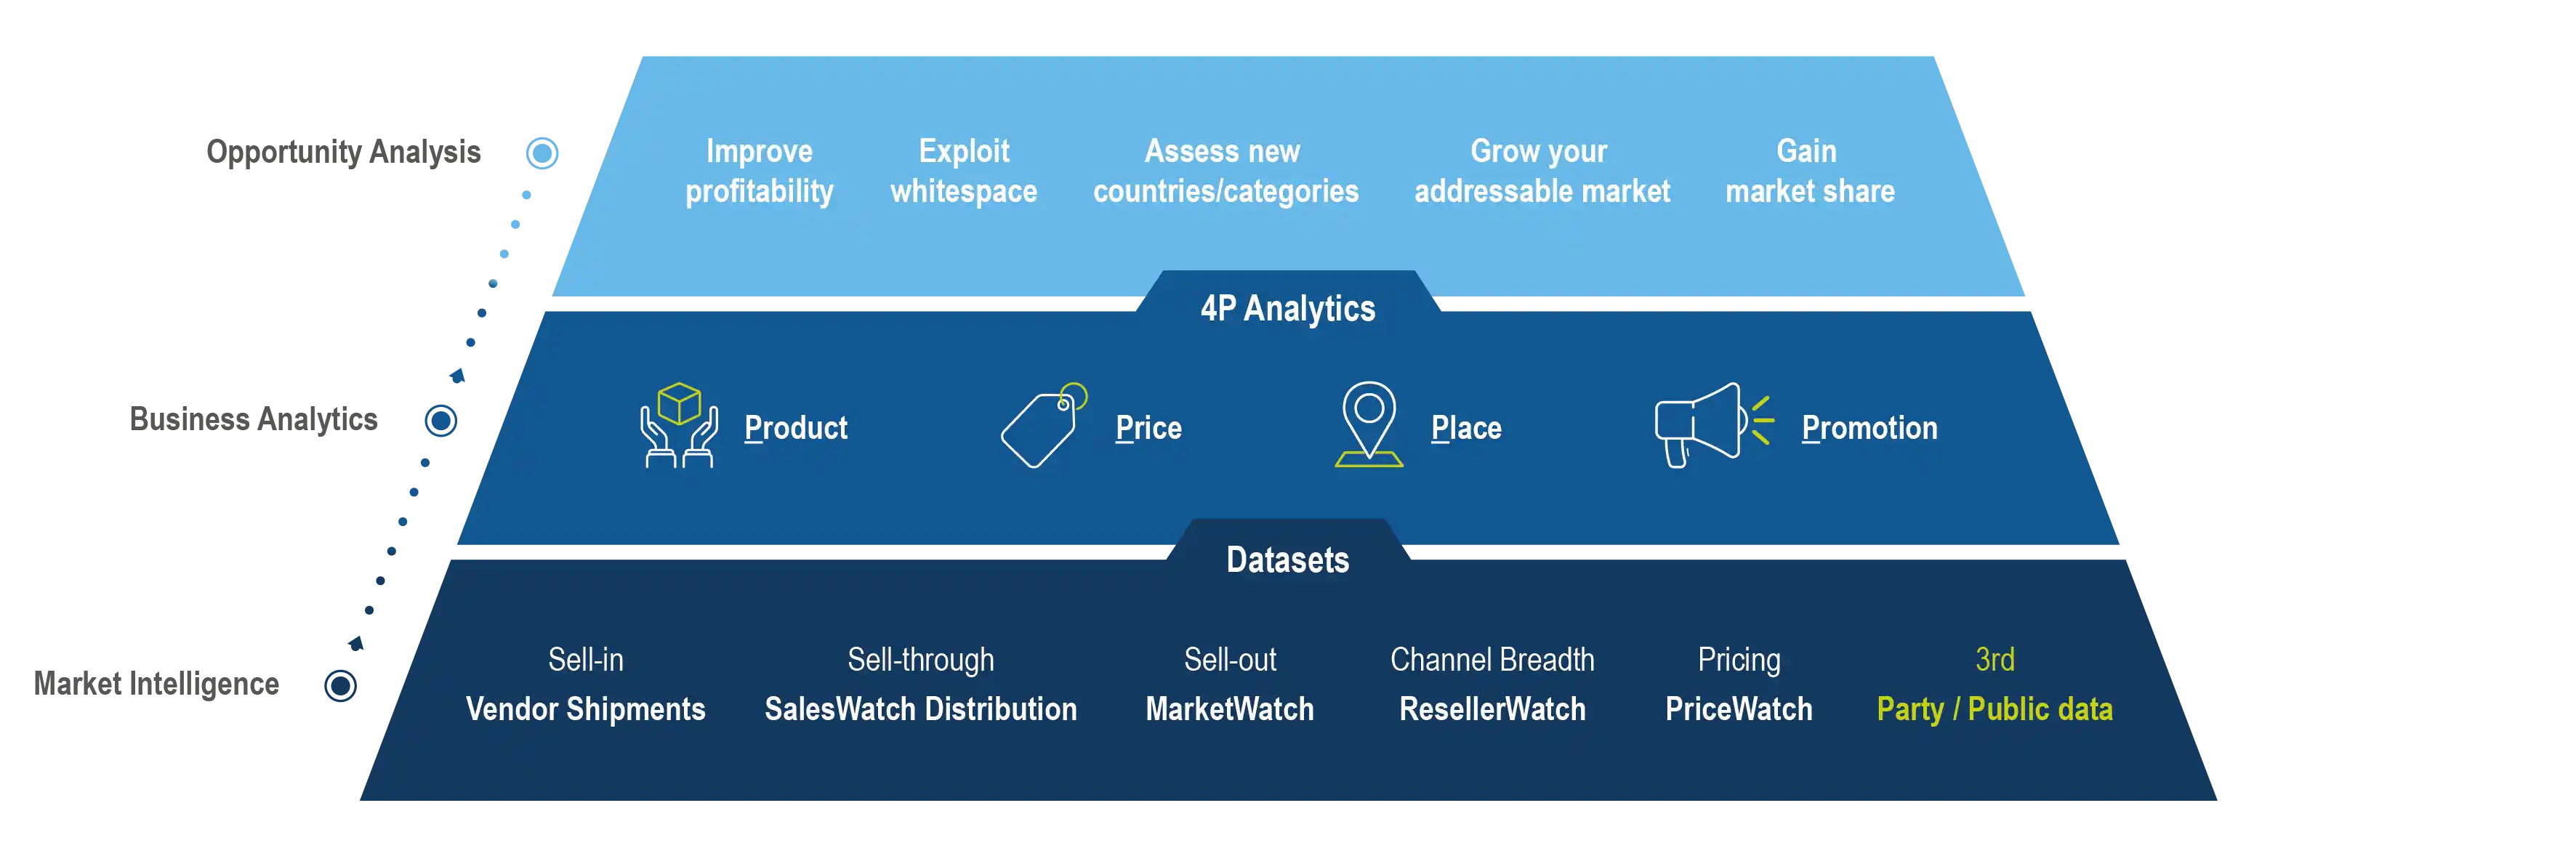 Solve your 4P challenges with tailored analytics solutions </br>built on a normalised view of the complete market